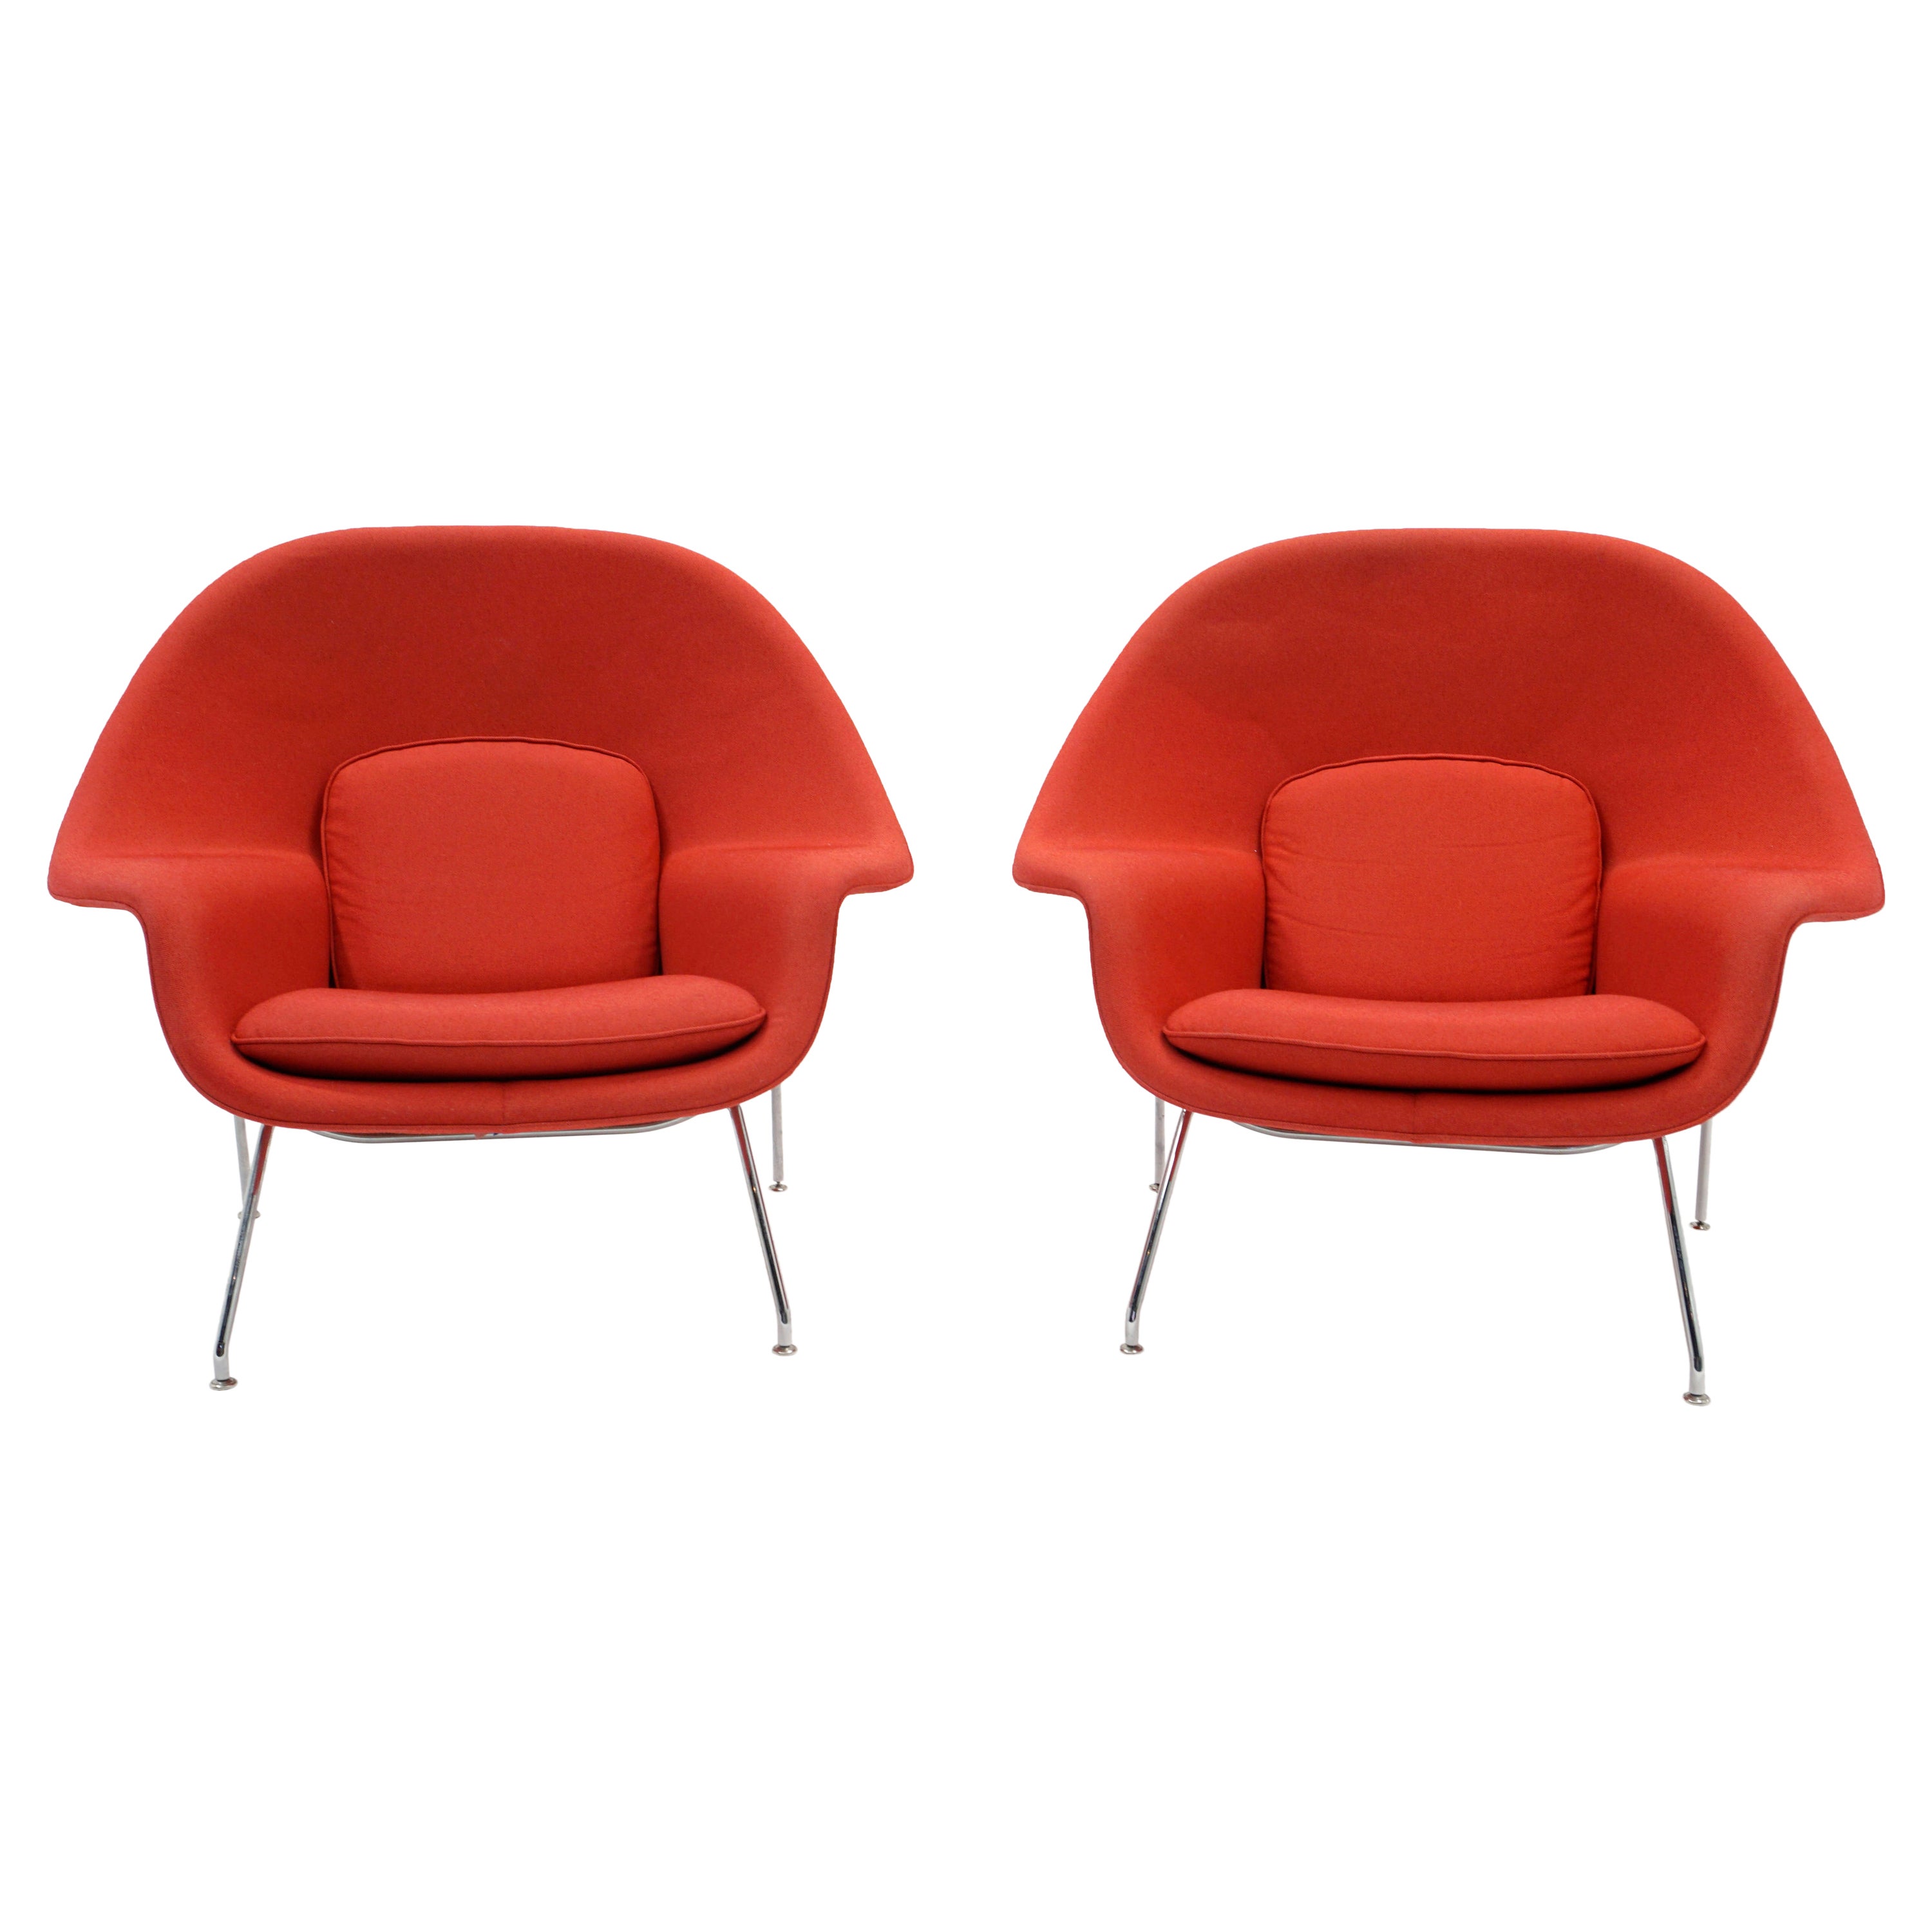 Pair Saarinen Womb Chairs for Knoll in Red with Chrome Frames, Ready to Use